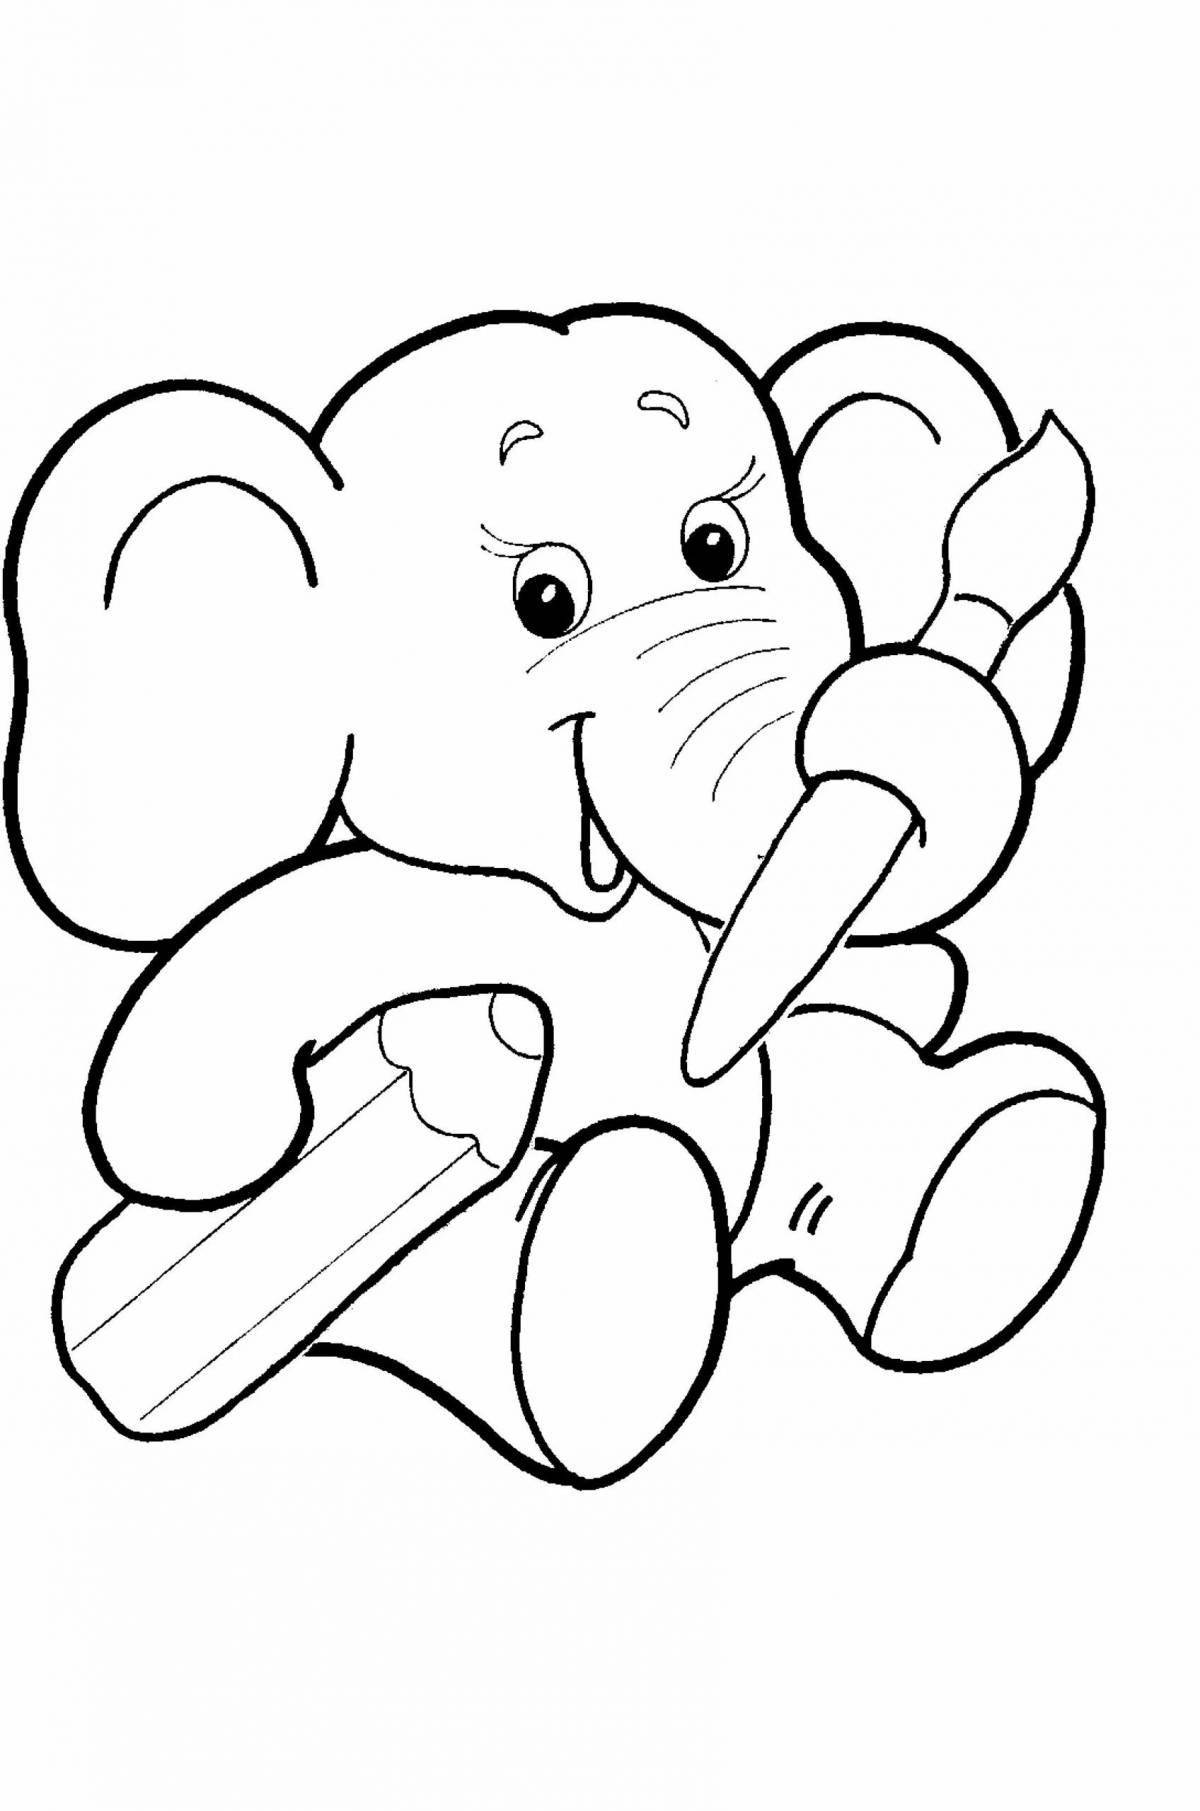 Coloring elephant for kids